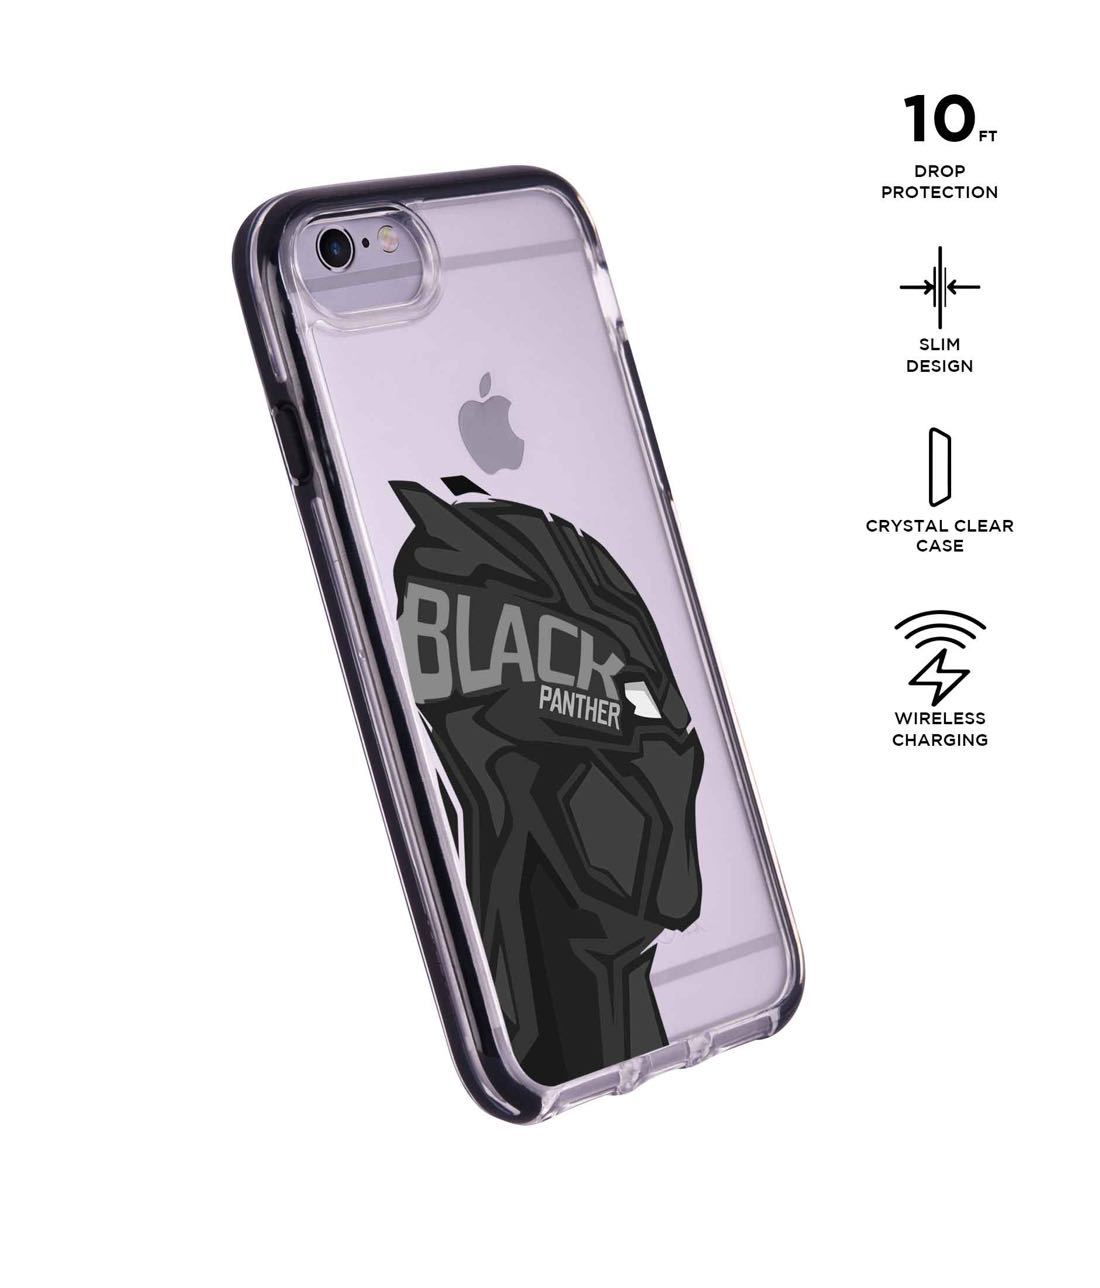 Black Panther Art - Extreme Phone Case for iPhone 6S Plus